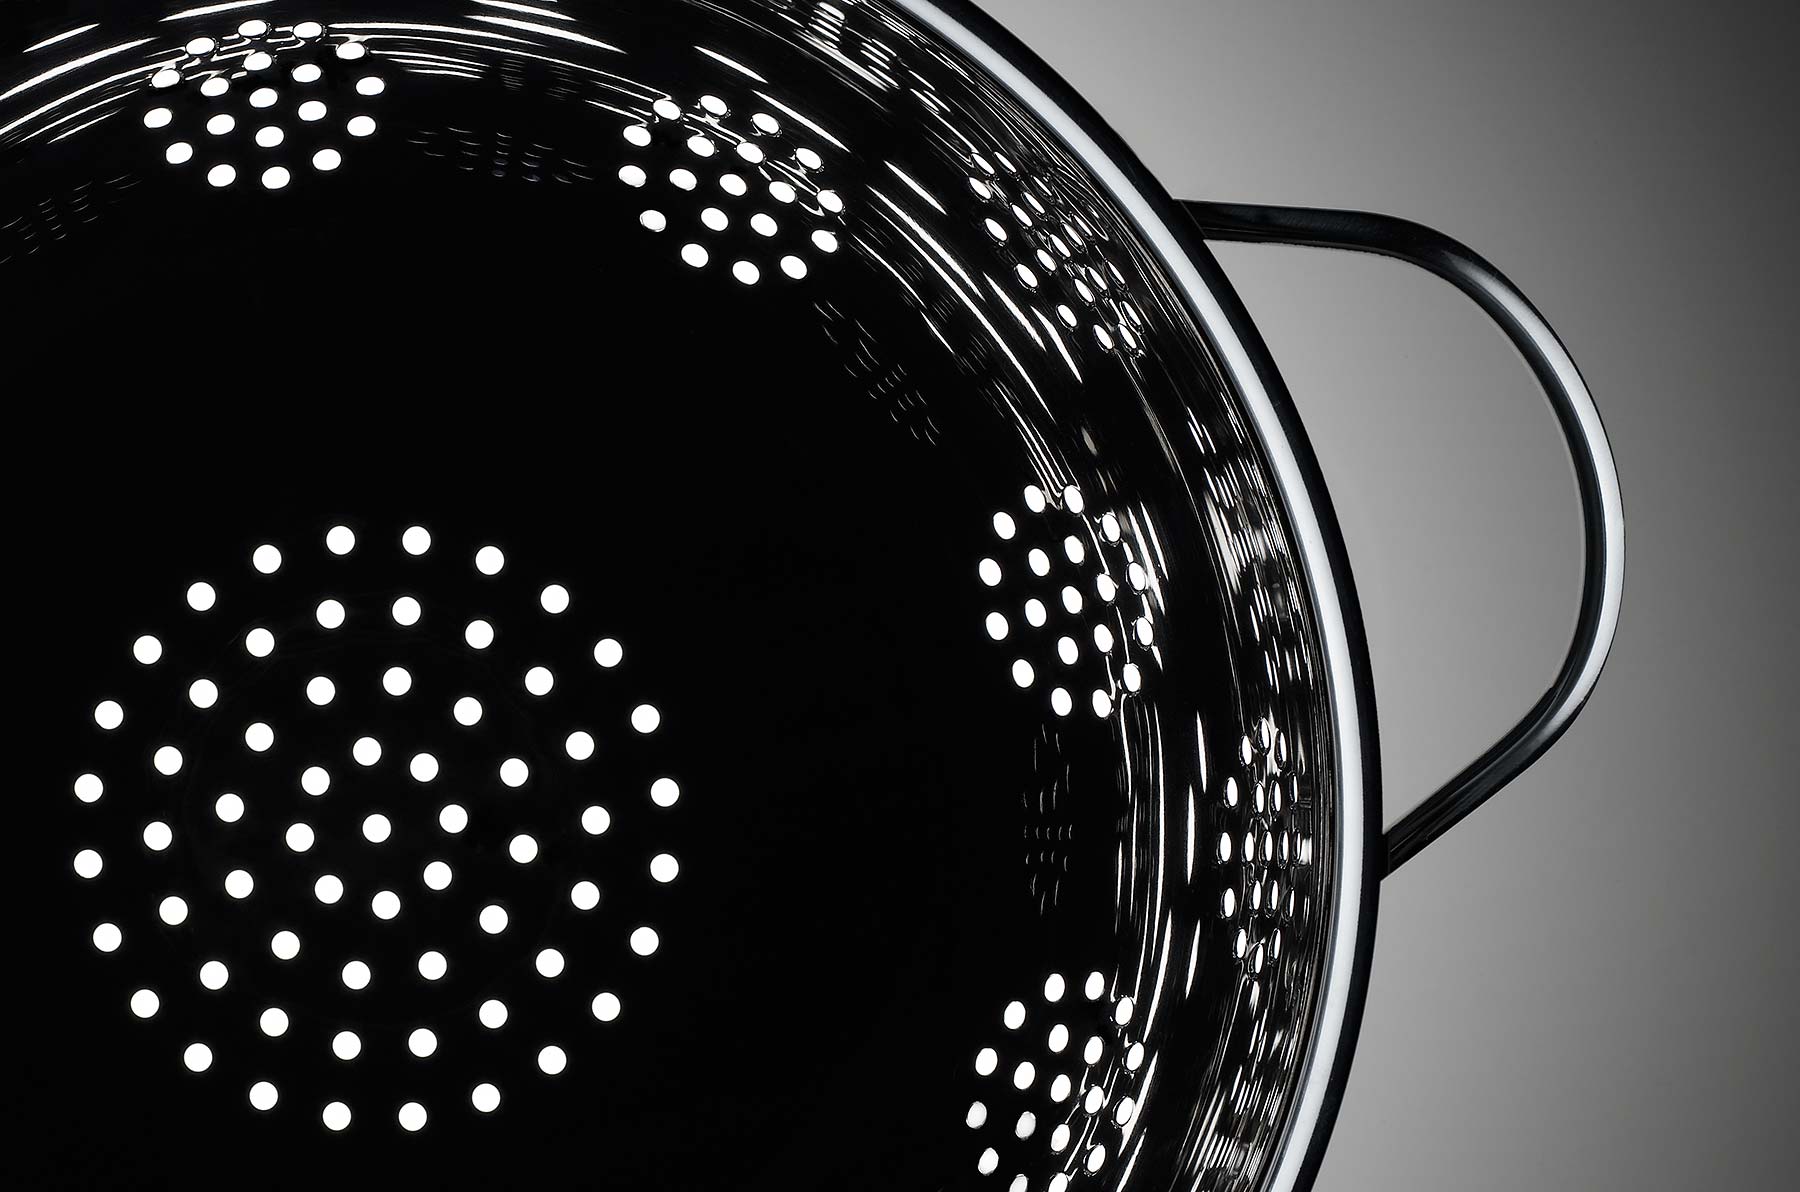 Kitchen colander product photography | Dovis Bird Agency Reps